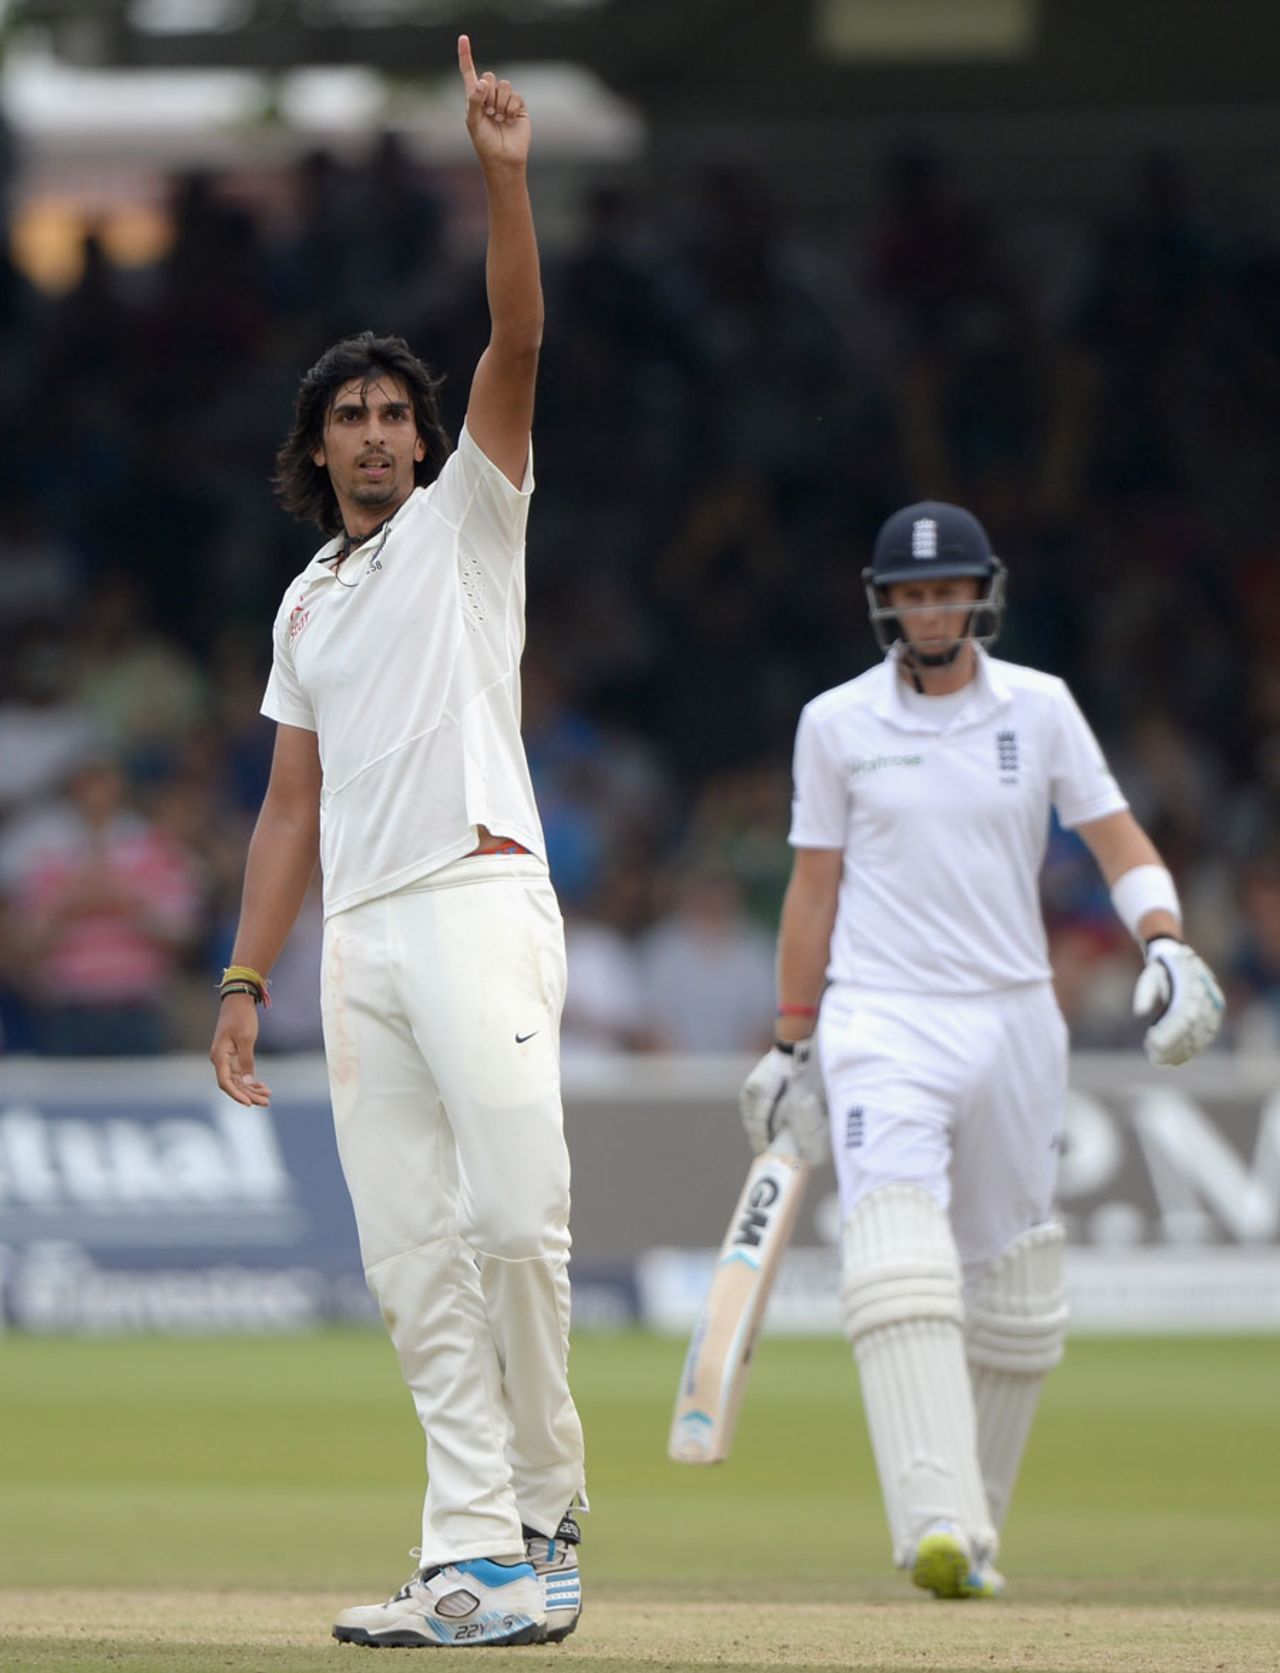 Ishant Sharma celebrates his five-wicket haul, England v India, 2nd Investec Test, Lord's, 5th day, July 21, 2014